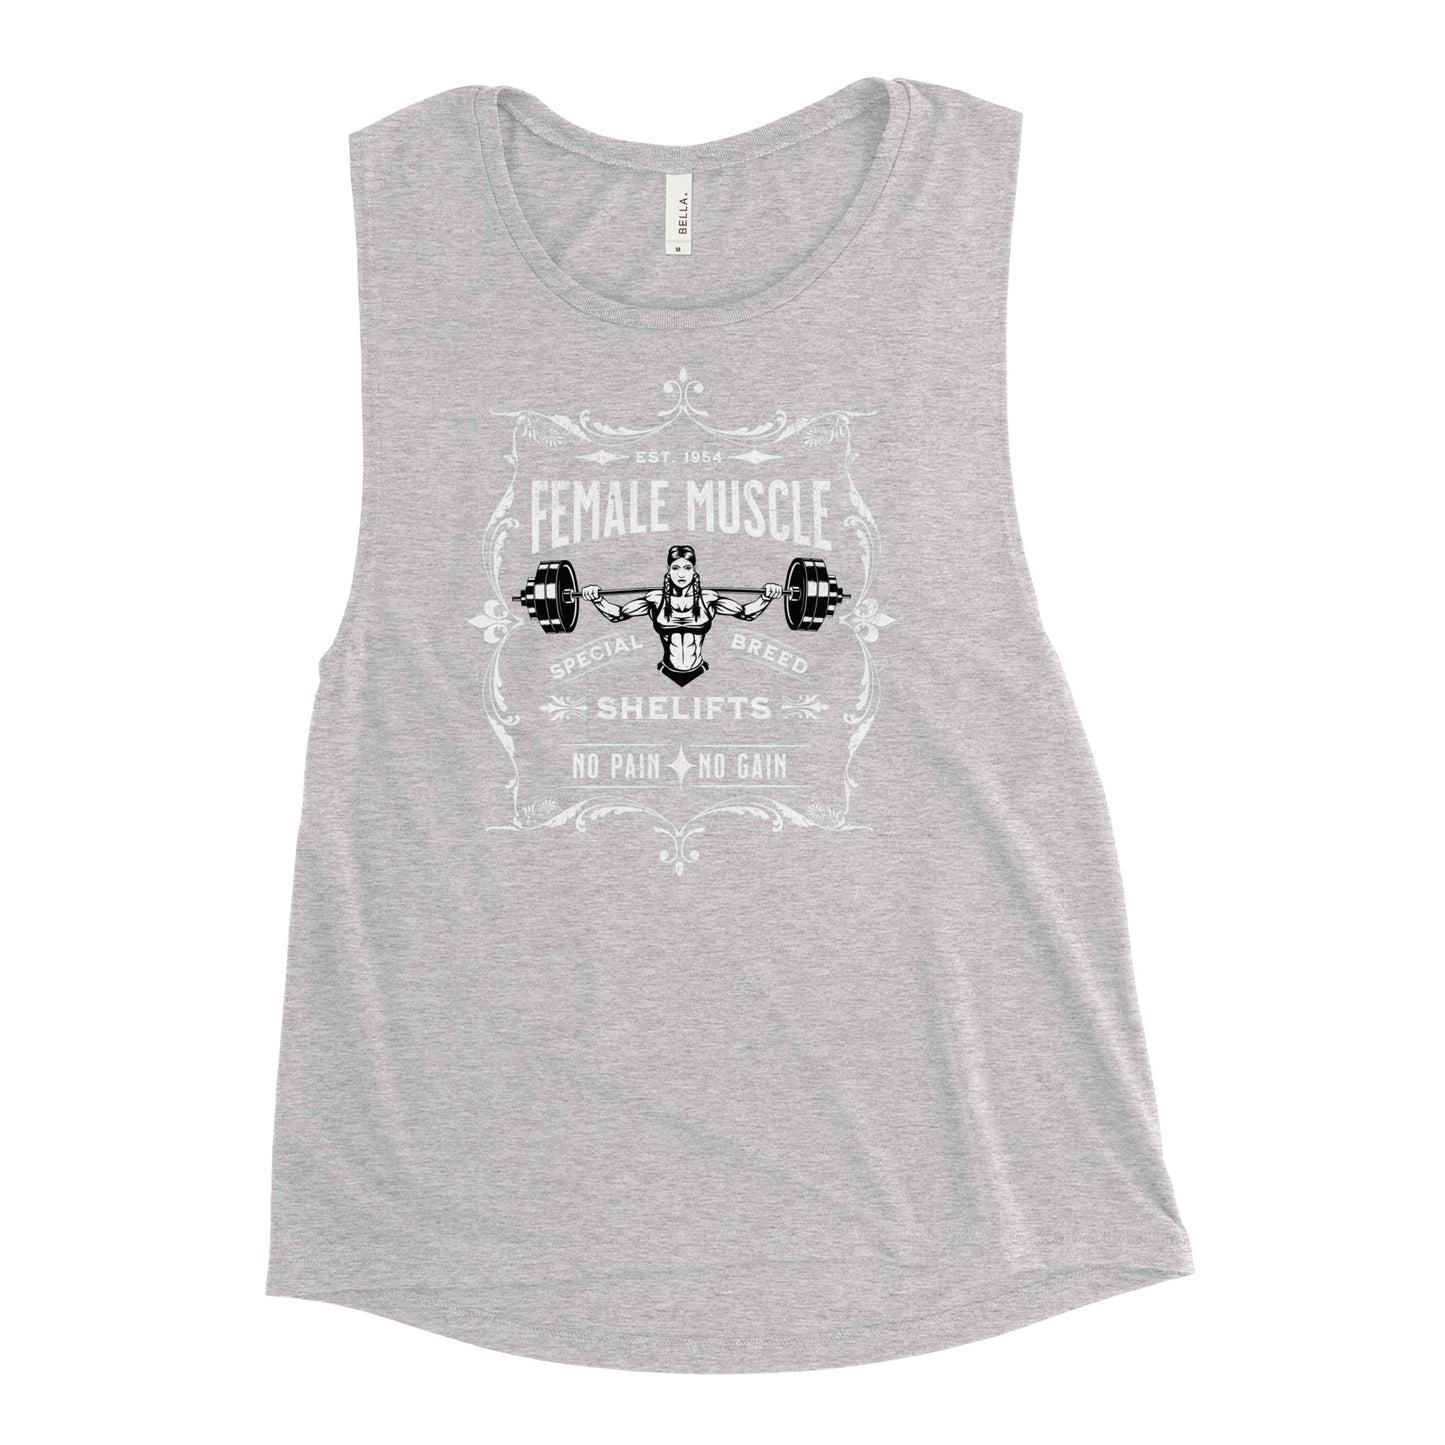 Female Muscle: Shelifts Ladies’ Muscle Tank